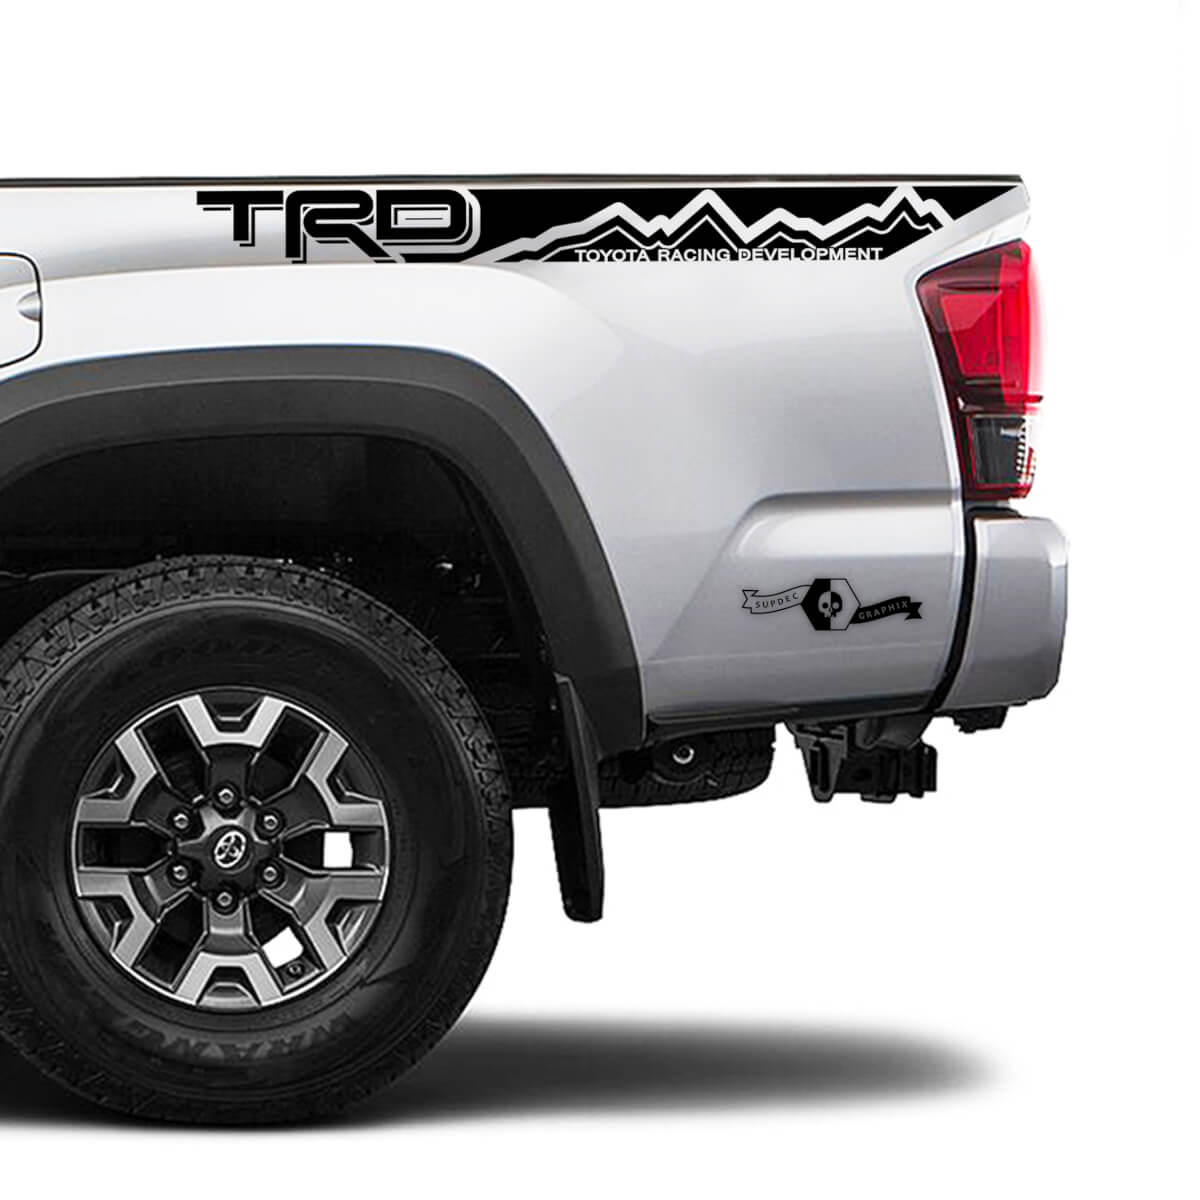 TRD Off Road TOYOTA Mountain Side Stripe Decals Stickers for Tacoma Tundra 4Runner Hilux